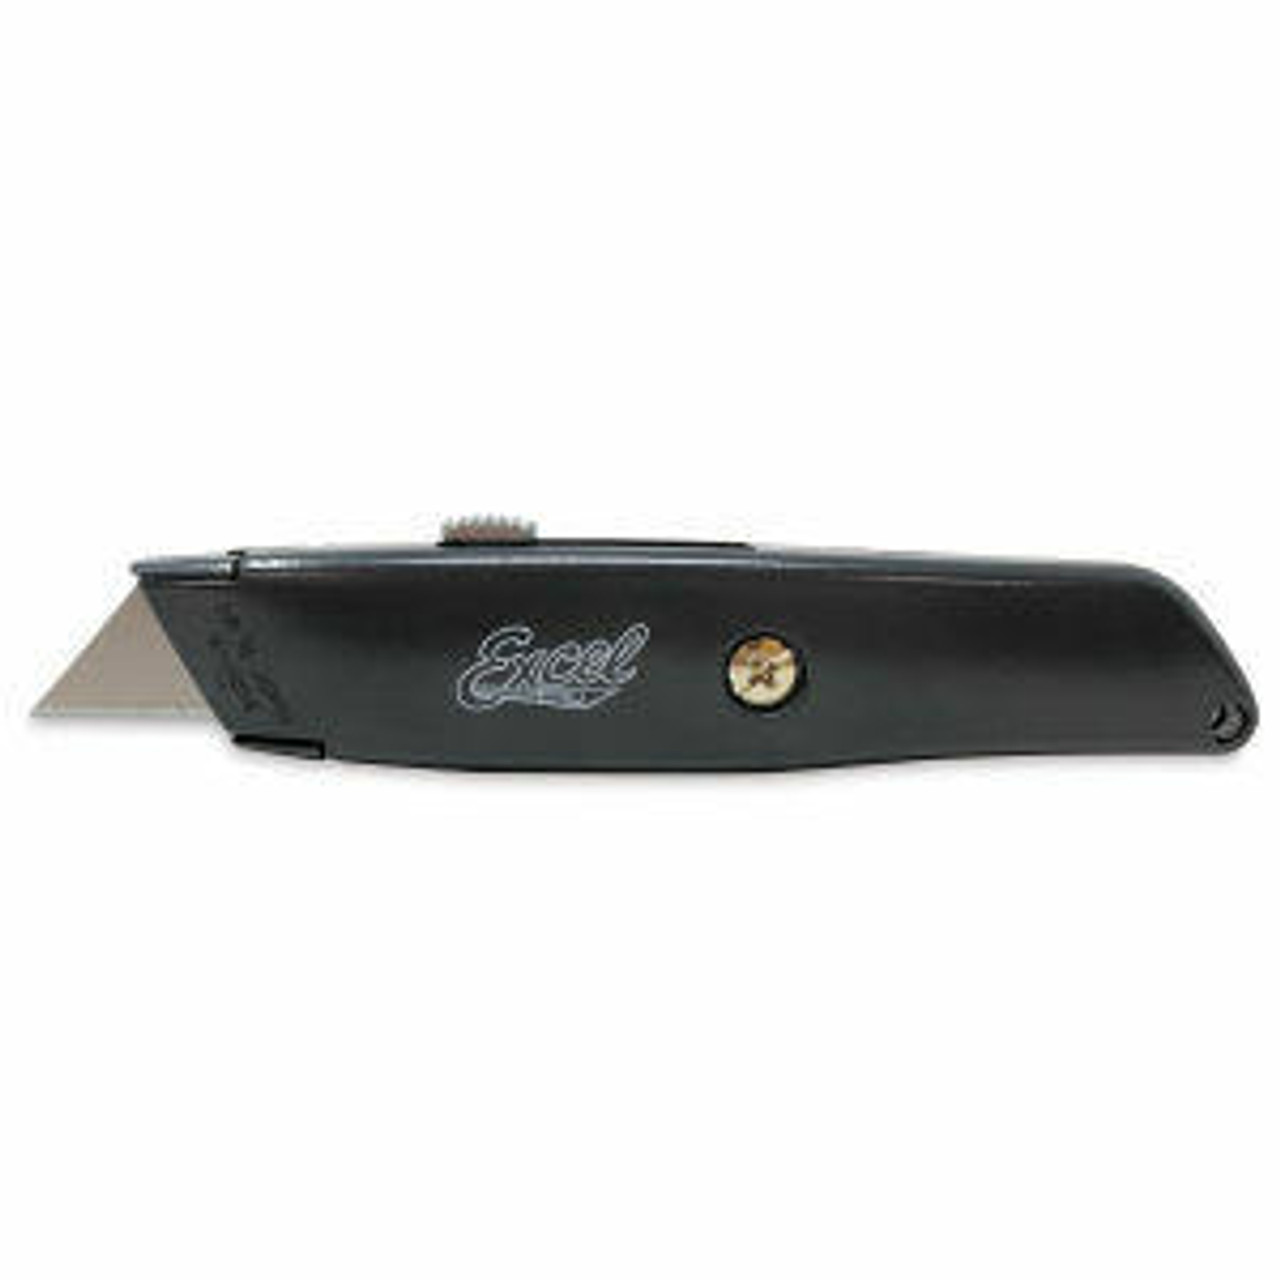 Basics Soft Grip Retractable Utility Knife with 3 Blades